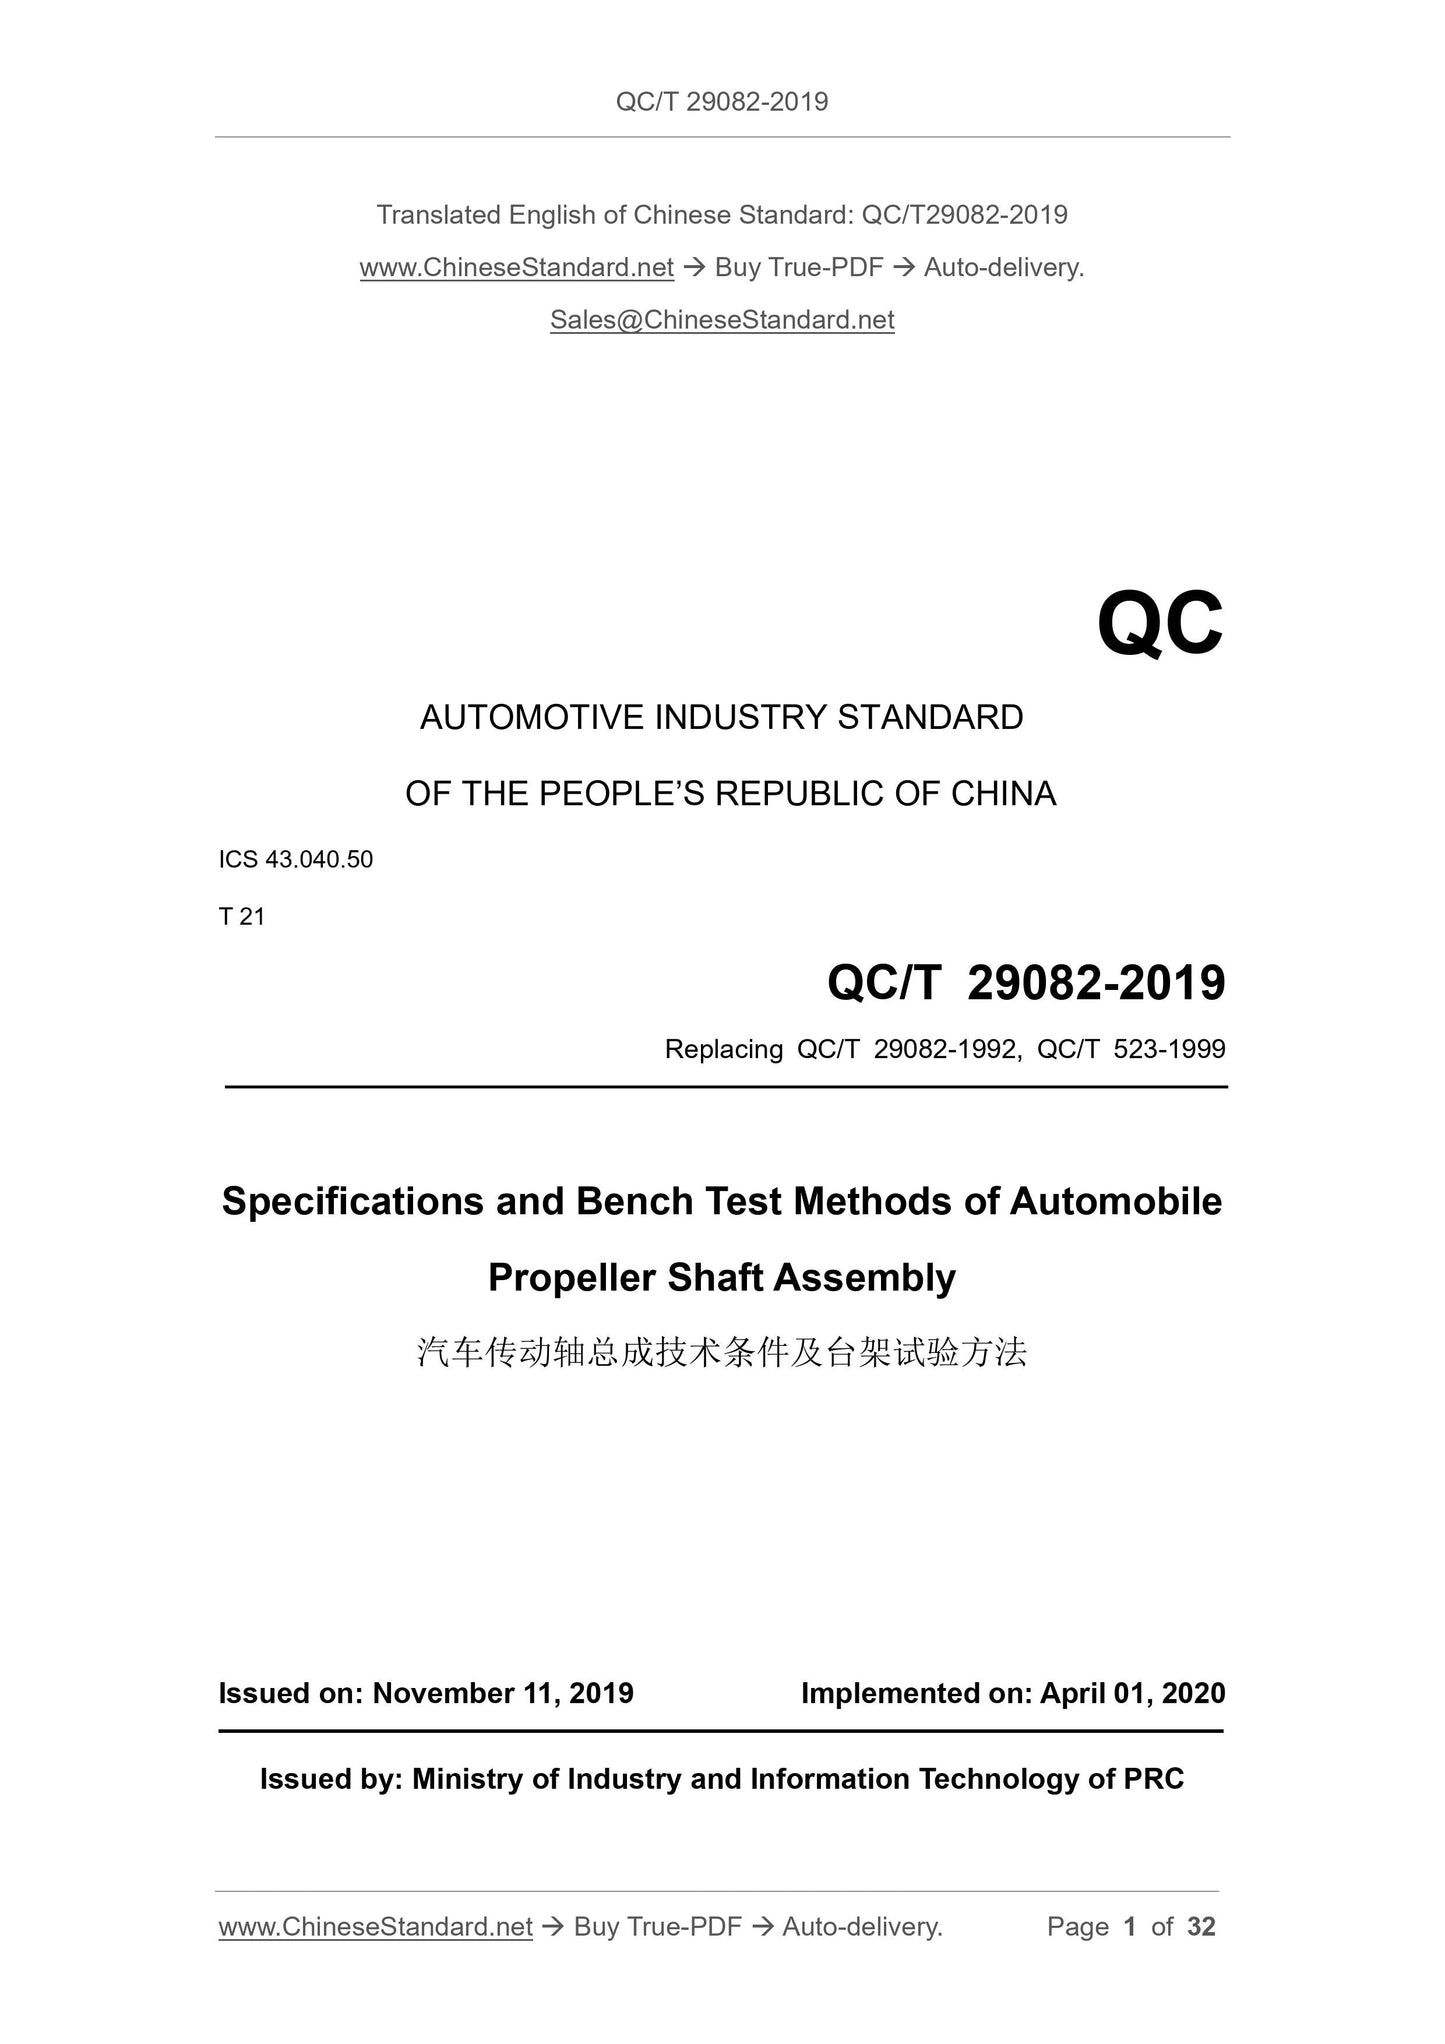 QC/T 29082-2019 Page 1